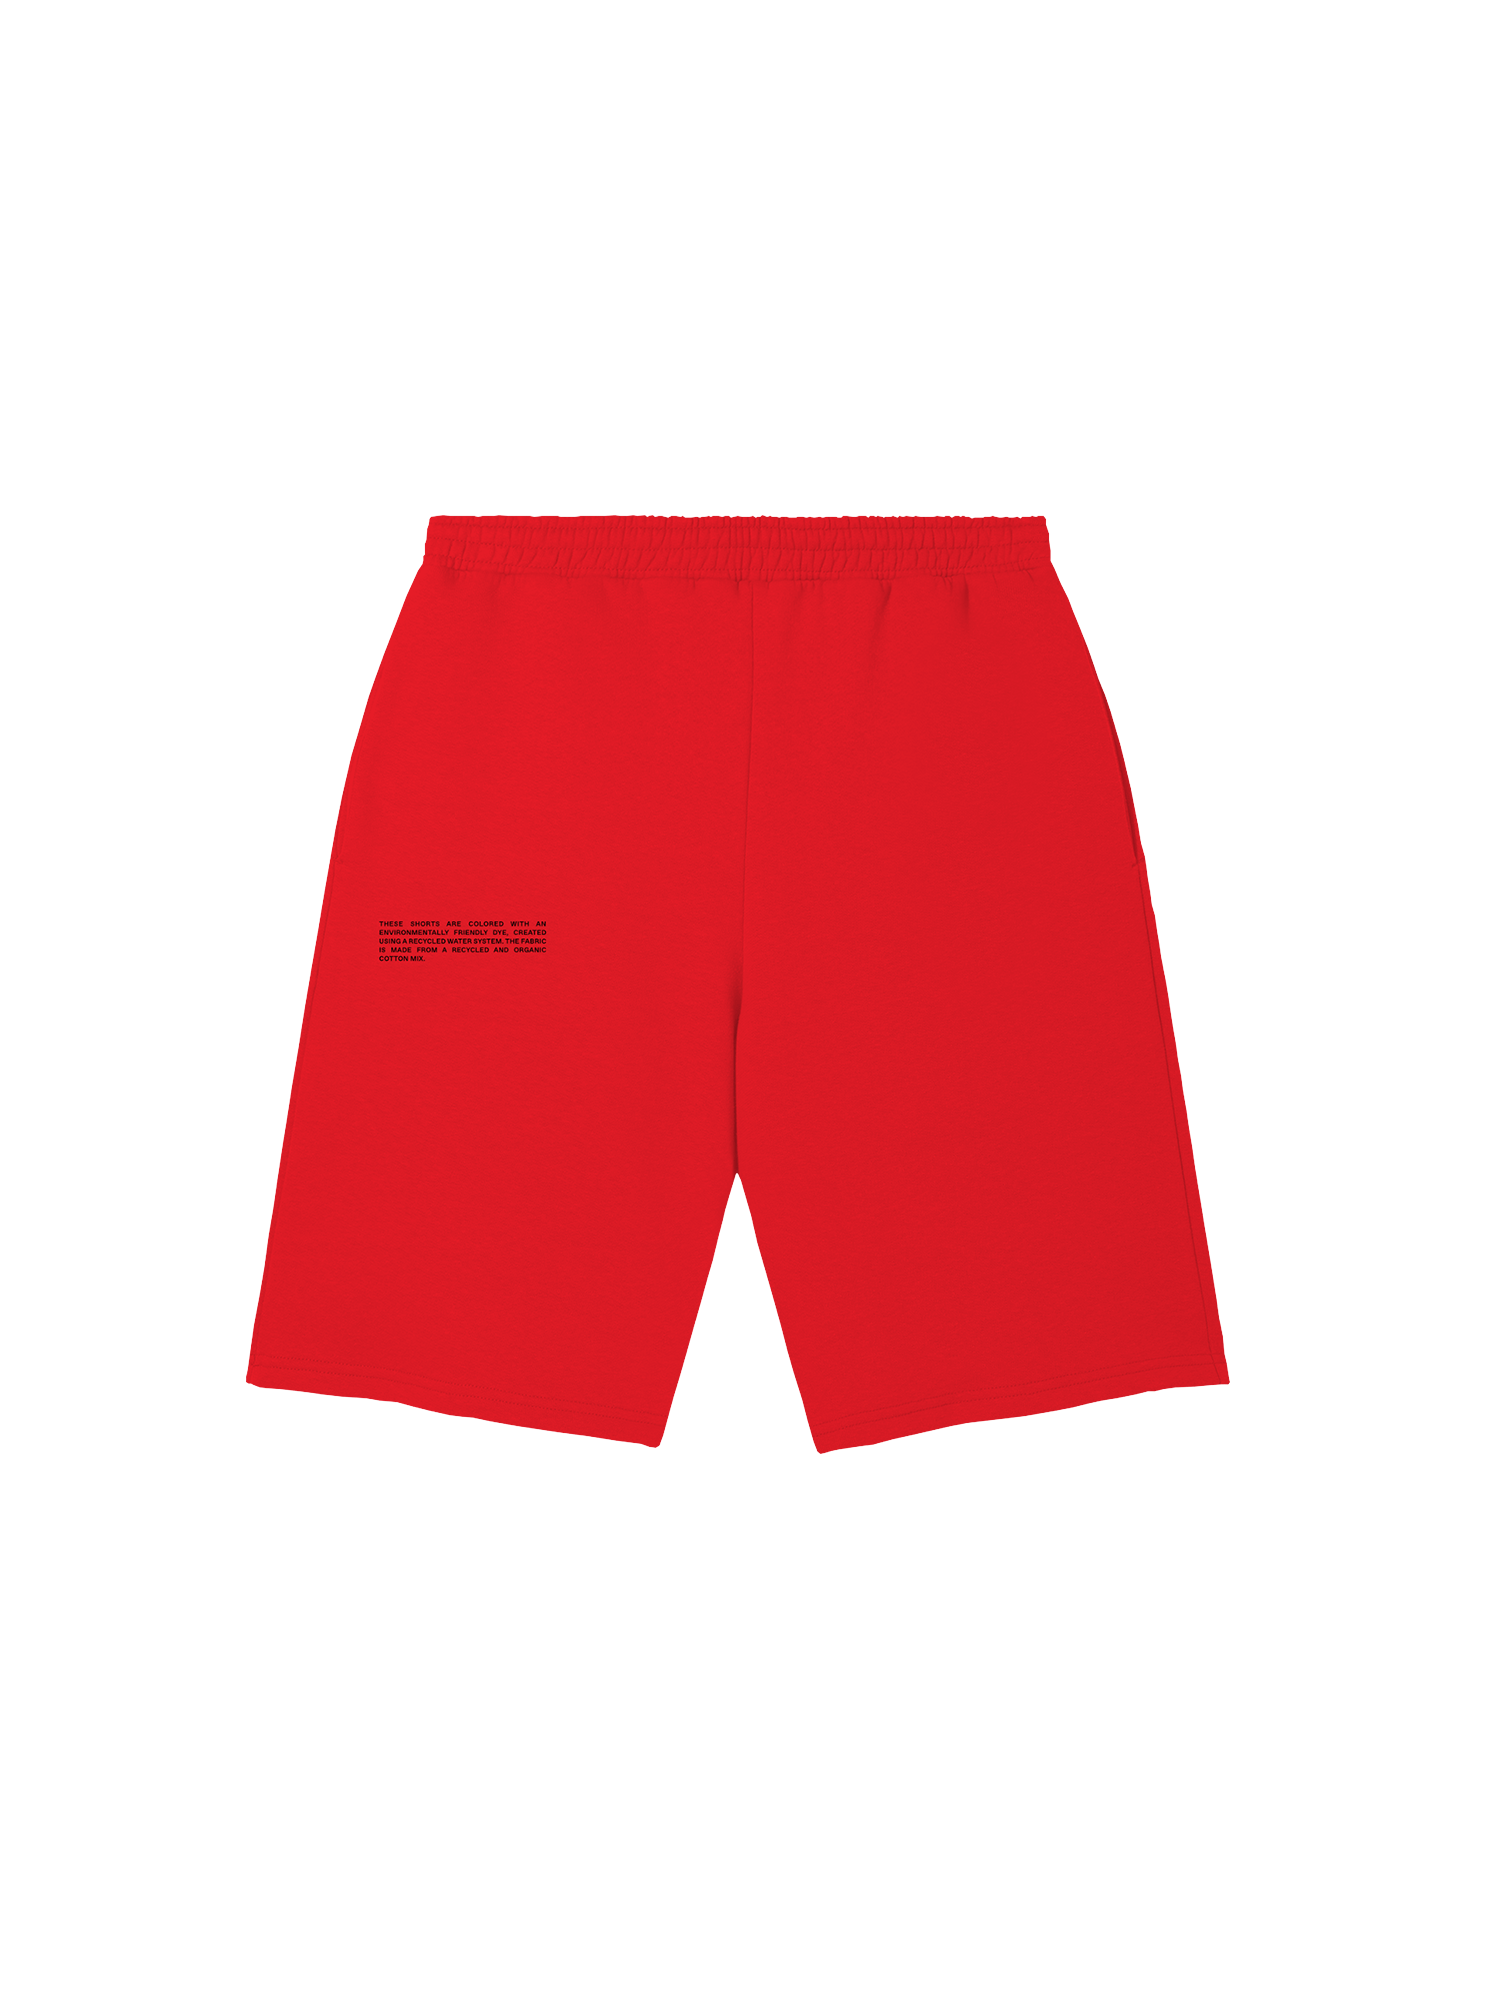 https://storage.googleapis.com/download/storage/v1/b/whering.appspot.com/o/marketplace_product_images%2Fpangaia-archive-lightweight-recycled-cotton-long-shortspoppy-red-dwfKA5xFbpV3aurCafR8fM.png?generation=1691643631421513&alt=media